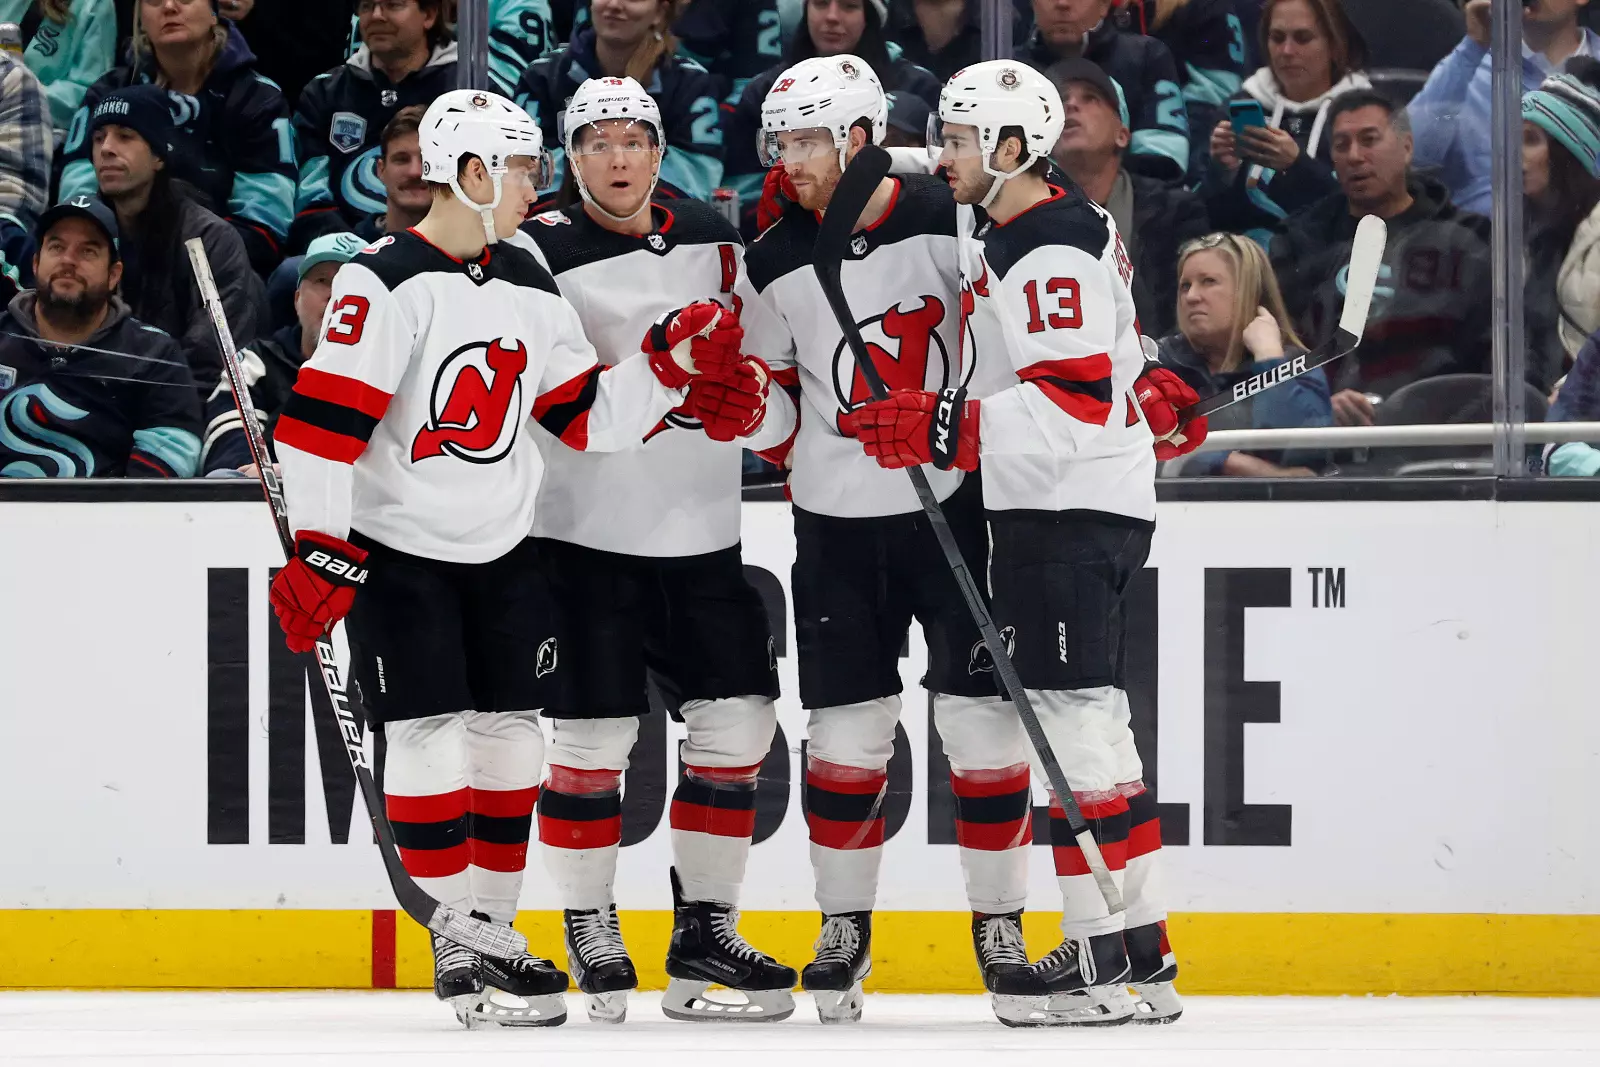 Devilish Prices: NJ Devils Playoffs Tickets Top $230 For Second